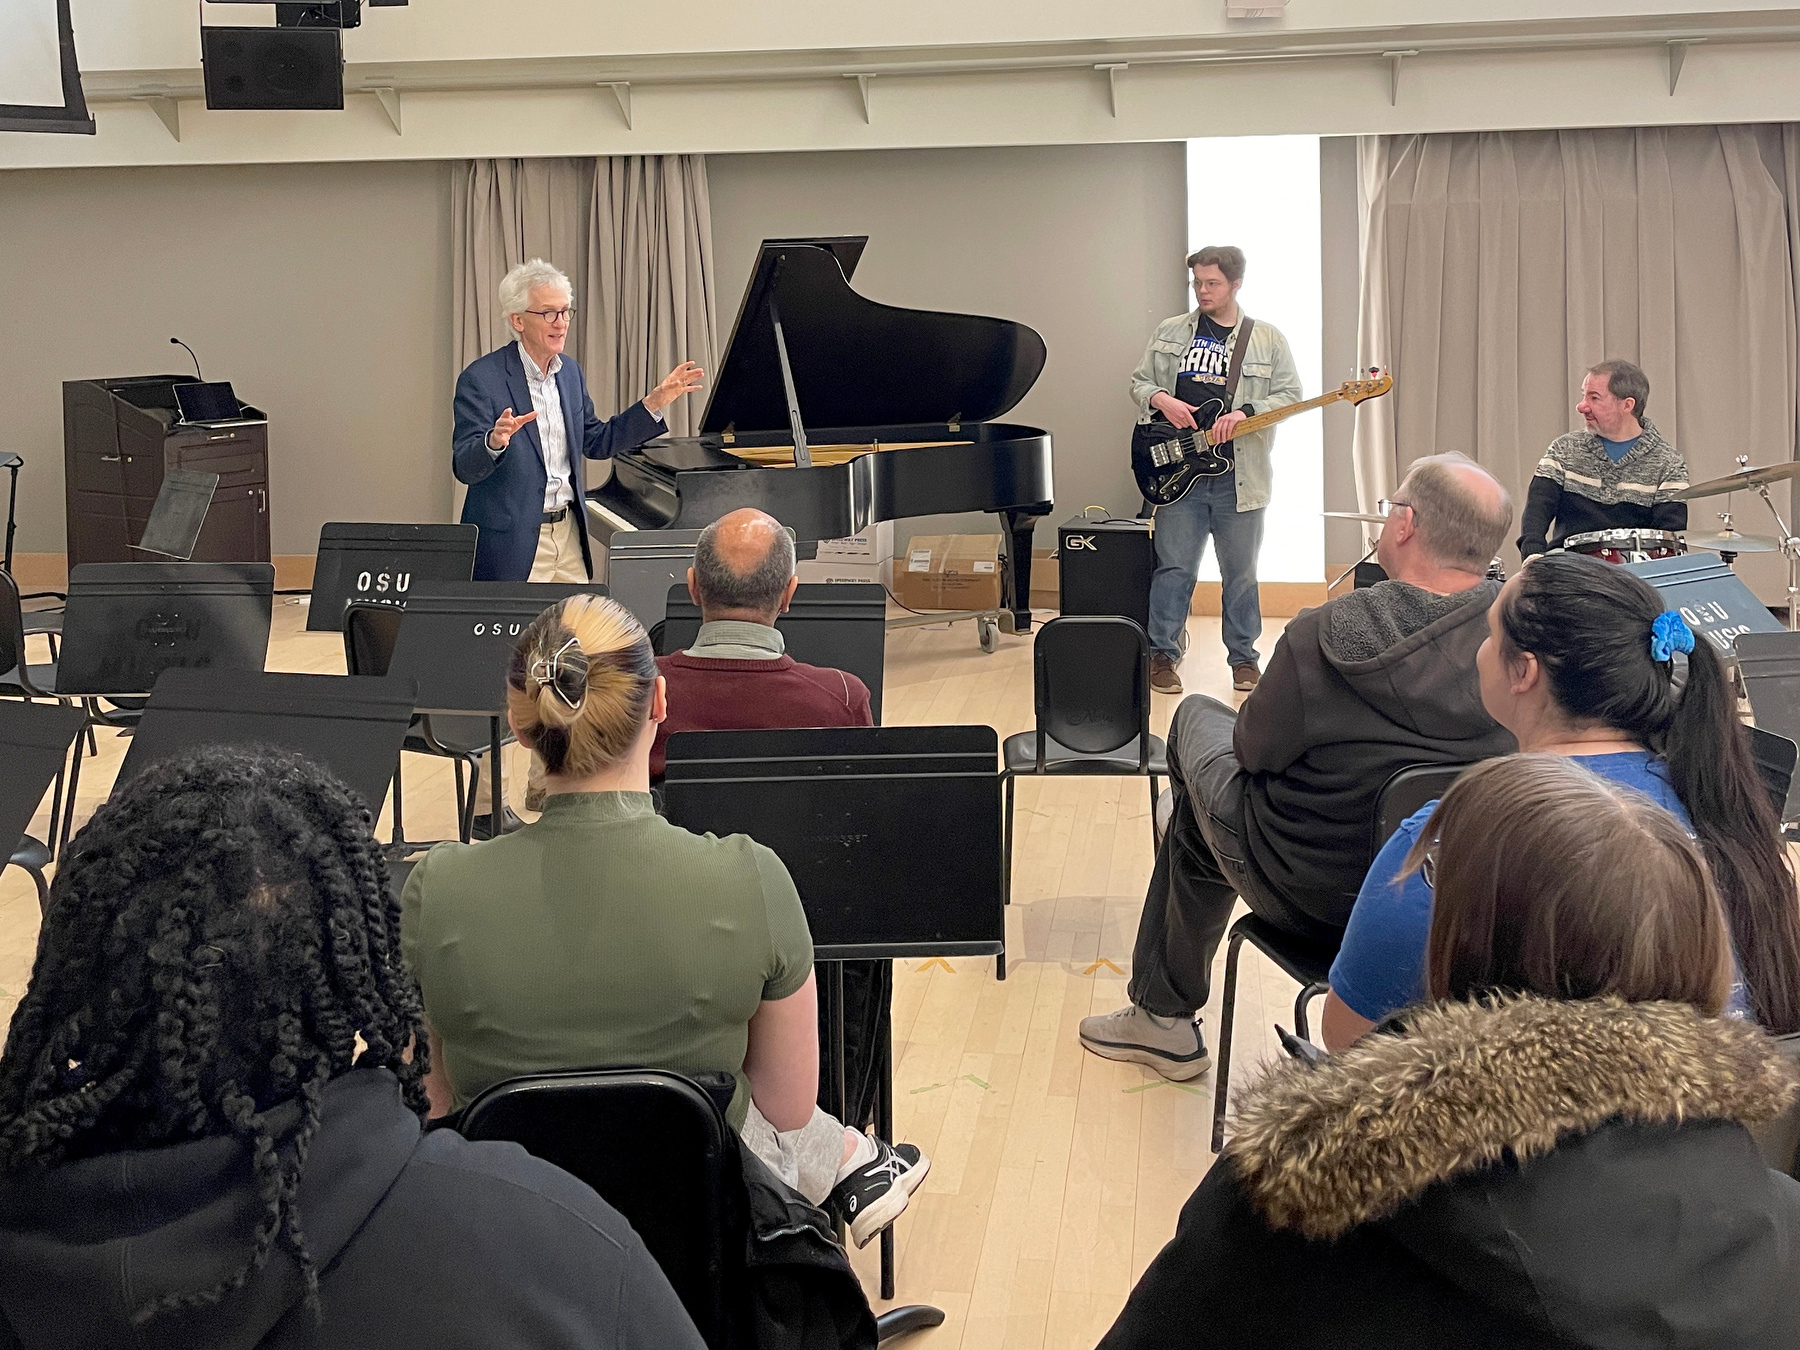 Visiting artist Christopher Azzara, an internationally recognized authority on music improvisation and creativity, led a series of improvisation workshops for students in Tyler Hall on March 24.